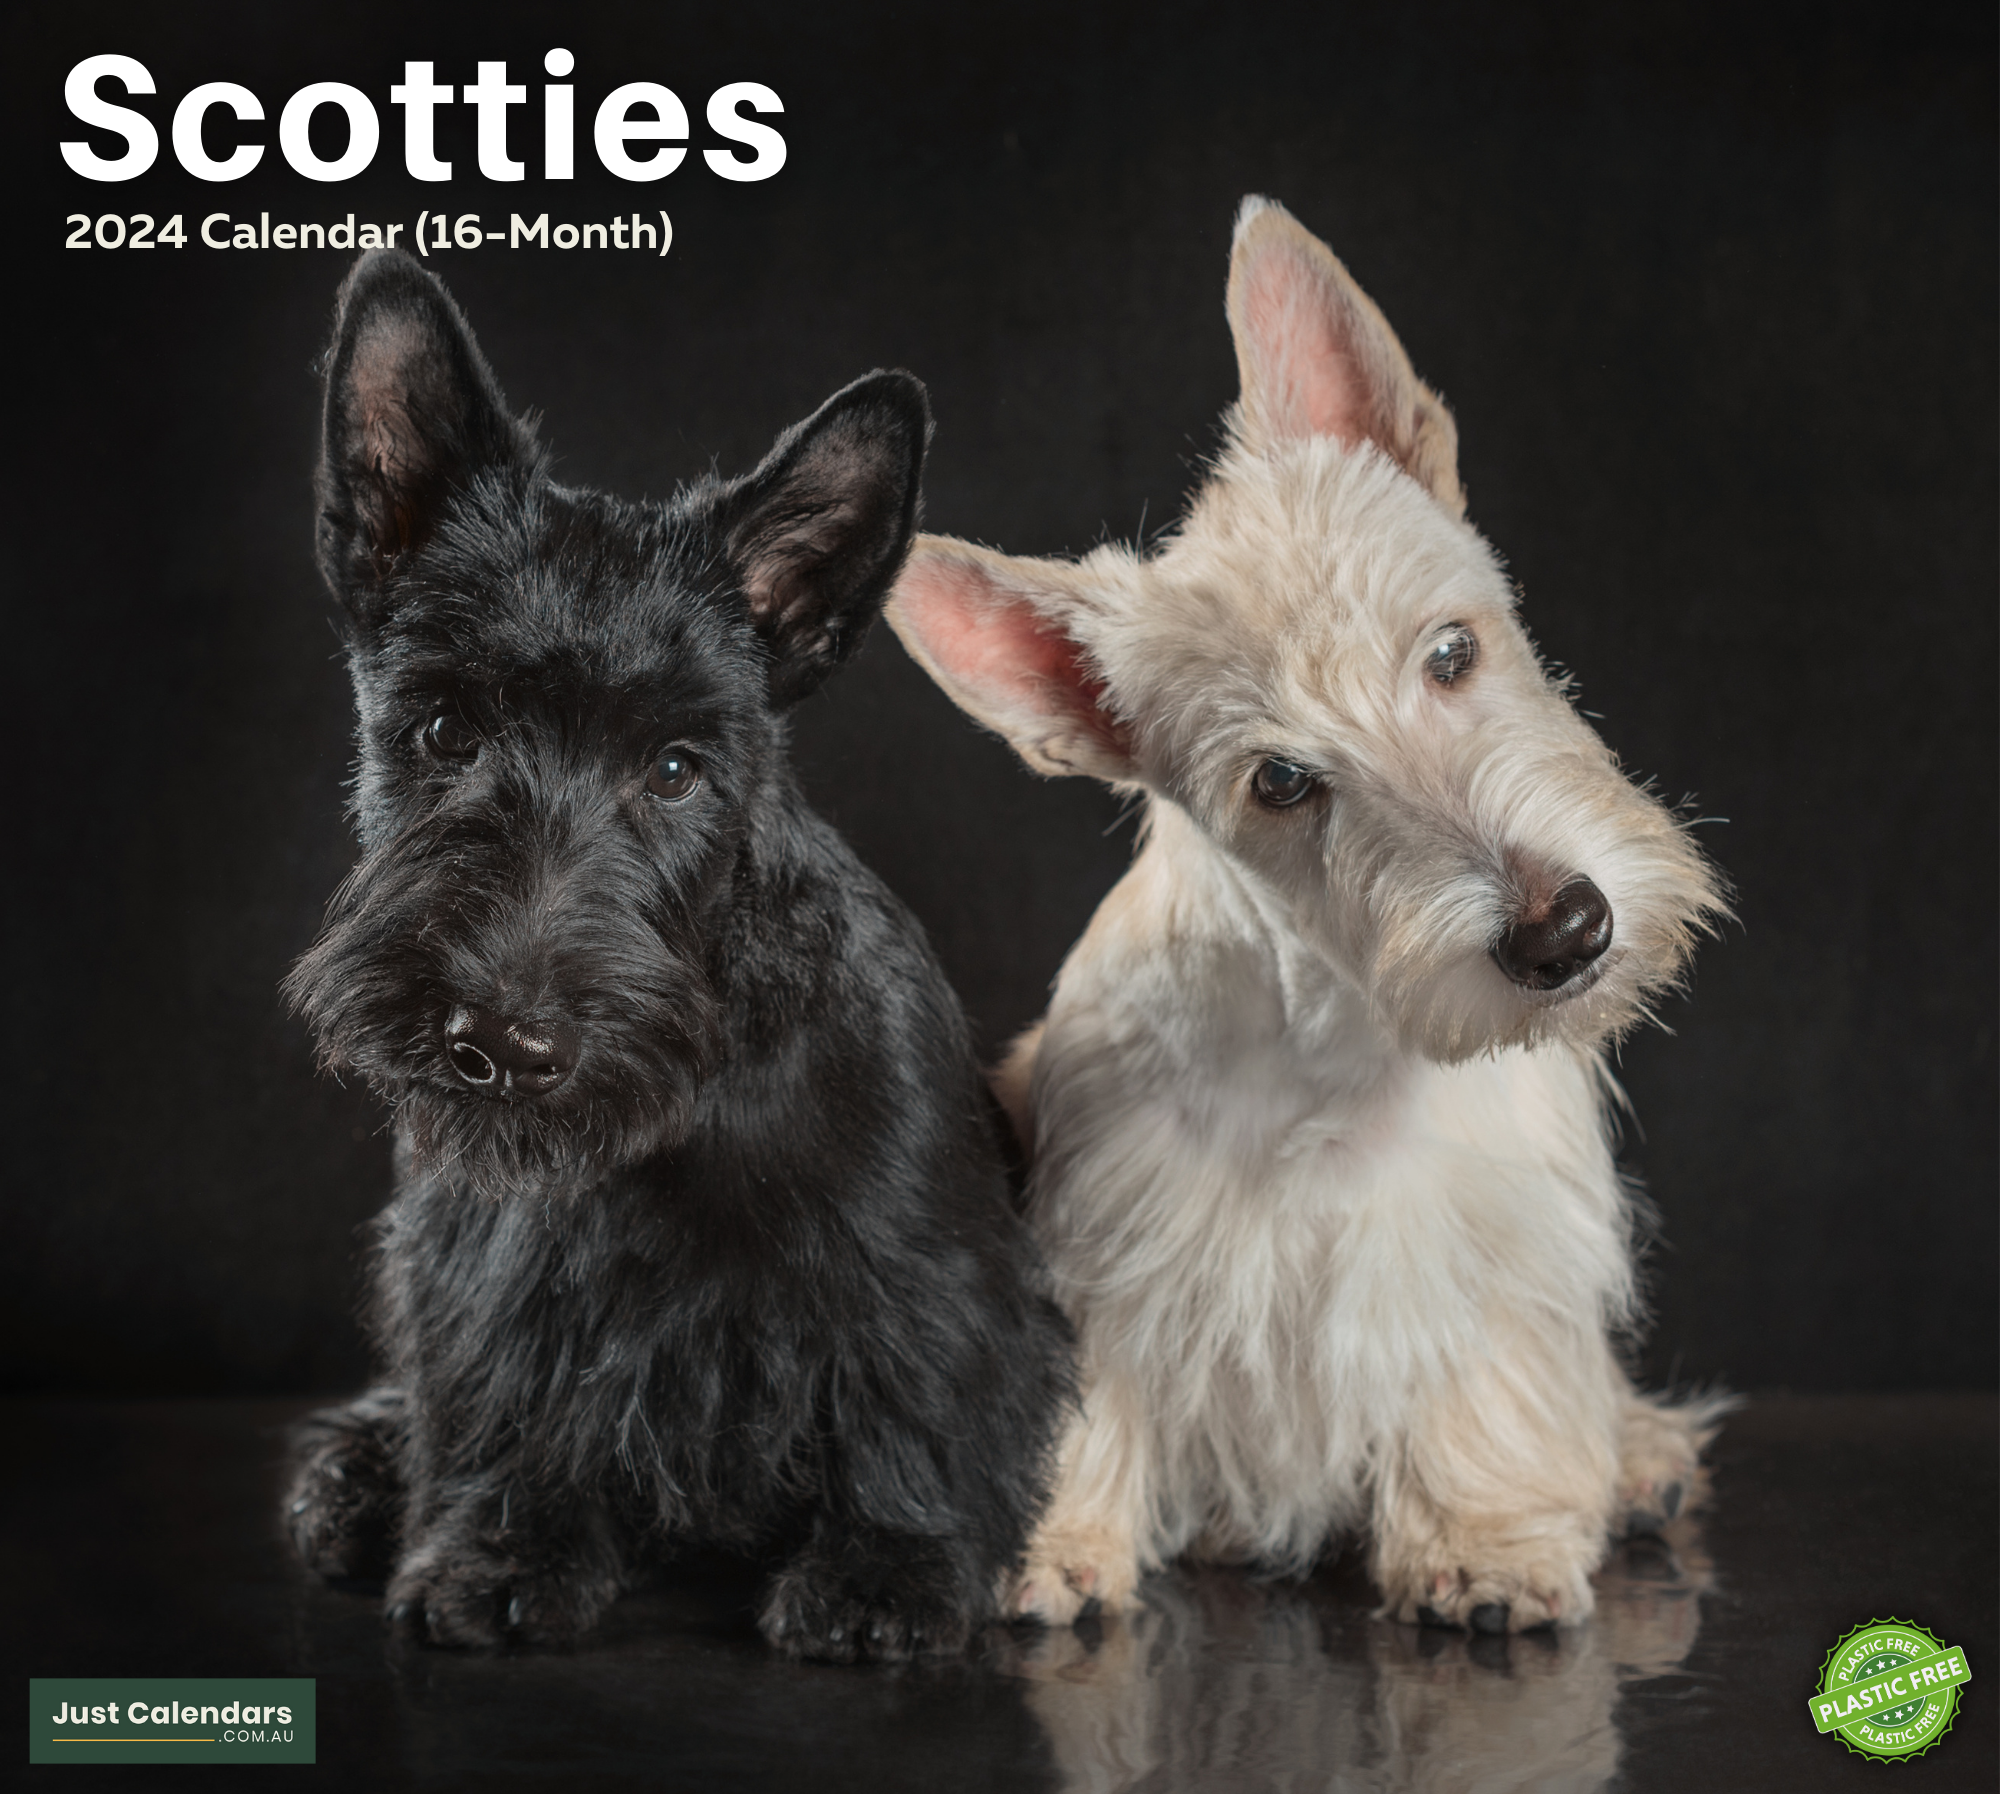 2024 Scotties (Scottish Terriers) Dogs & Puppies - Deluxe Wall Calendar by Just Calendars - 16 Month - Plastic Free